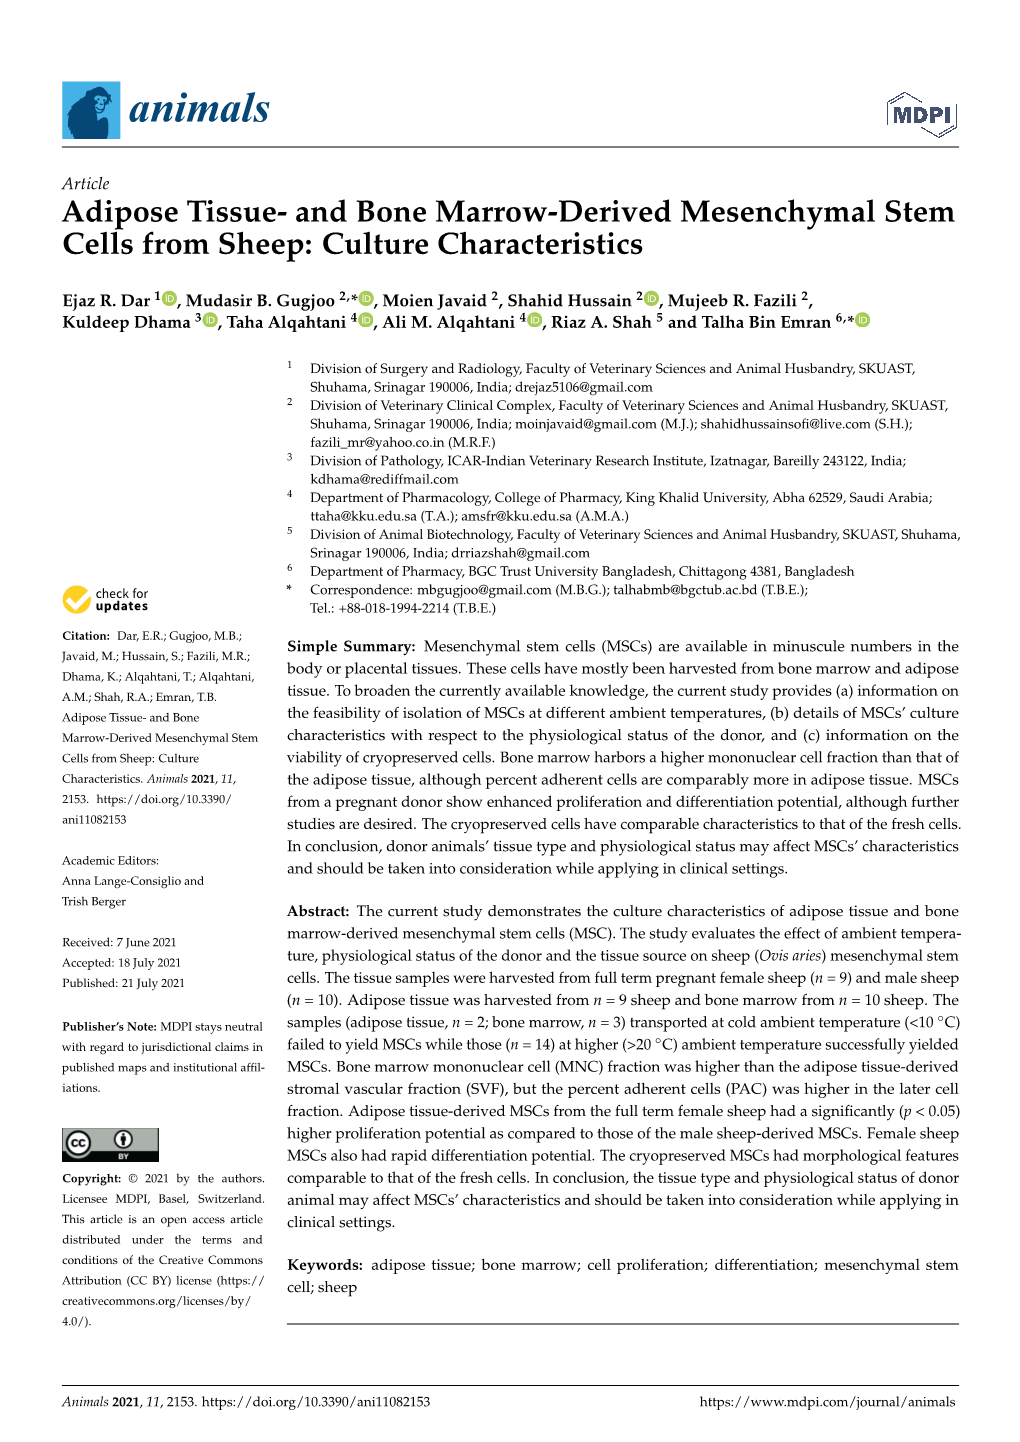 Adipose Tissue- and Bone Marrow-Derived Mesenchymal Stem Cells from Sheep: Culture Characteristics